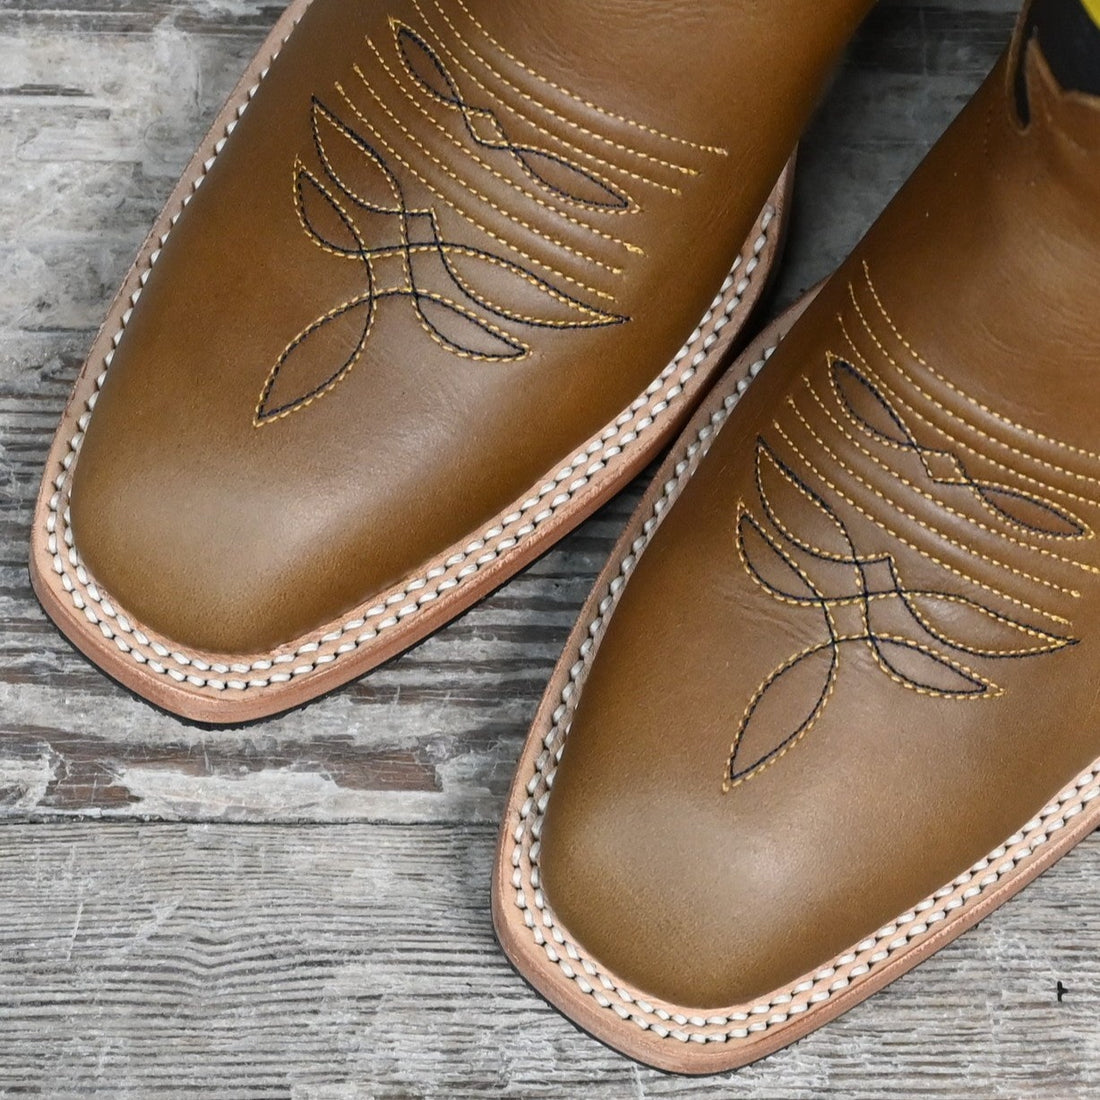 Mens Tan Boot withTooled Navy Blue and Gold Arrow Tops view of toe